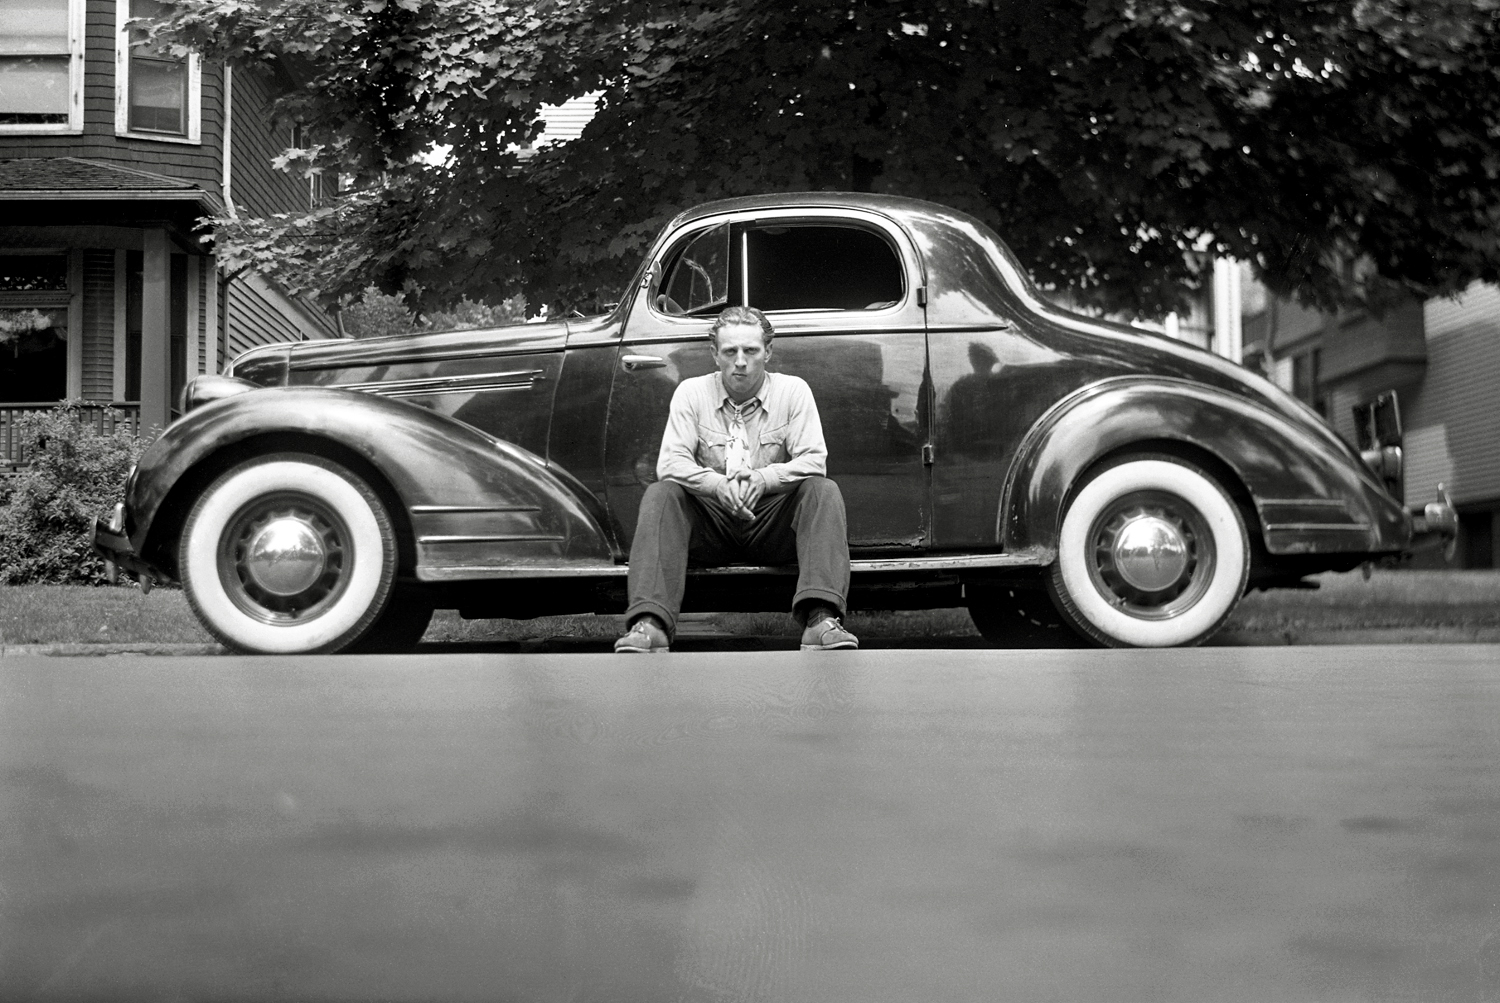 My dad took this in the late 1930's either in Detroit or Dearborn, Michigan.  I think the guy is my dad's cousin.  No idea what kind of car. View full size.